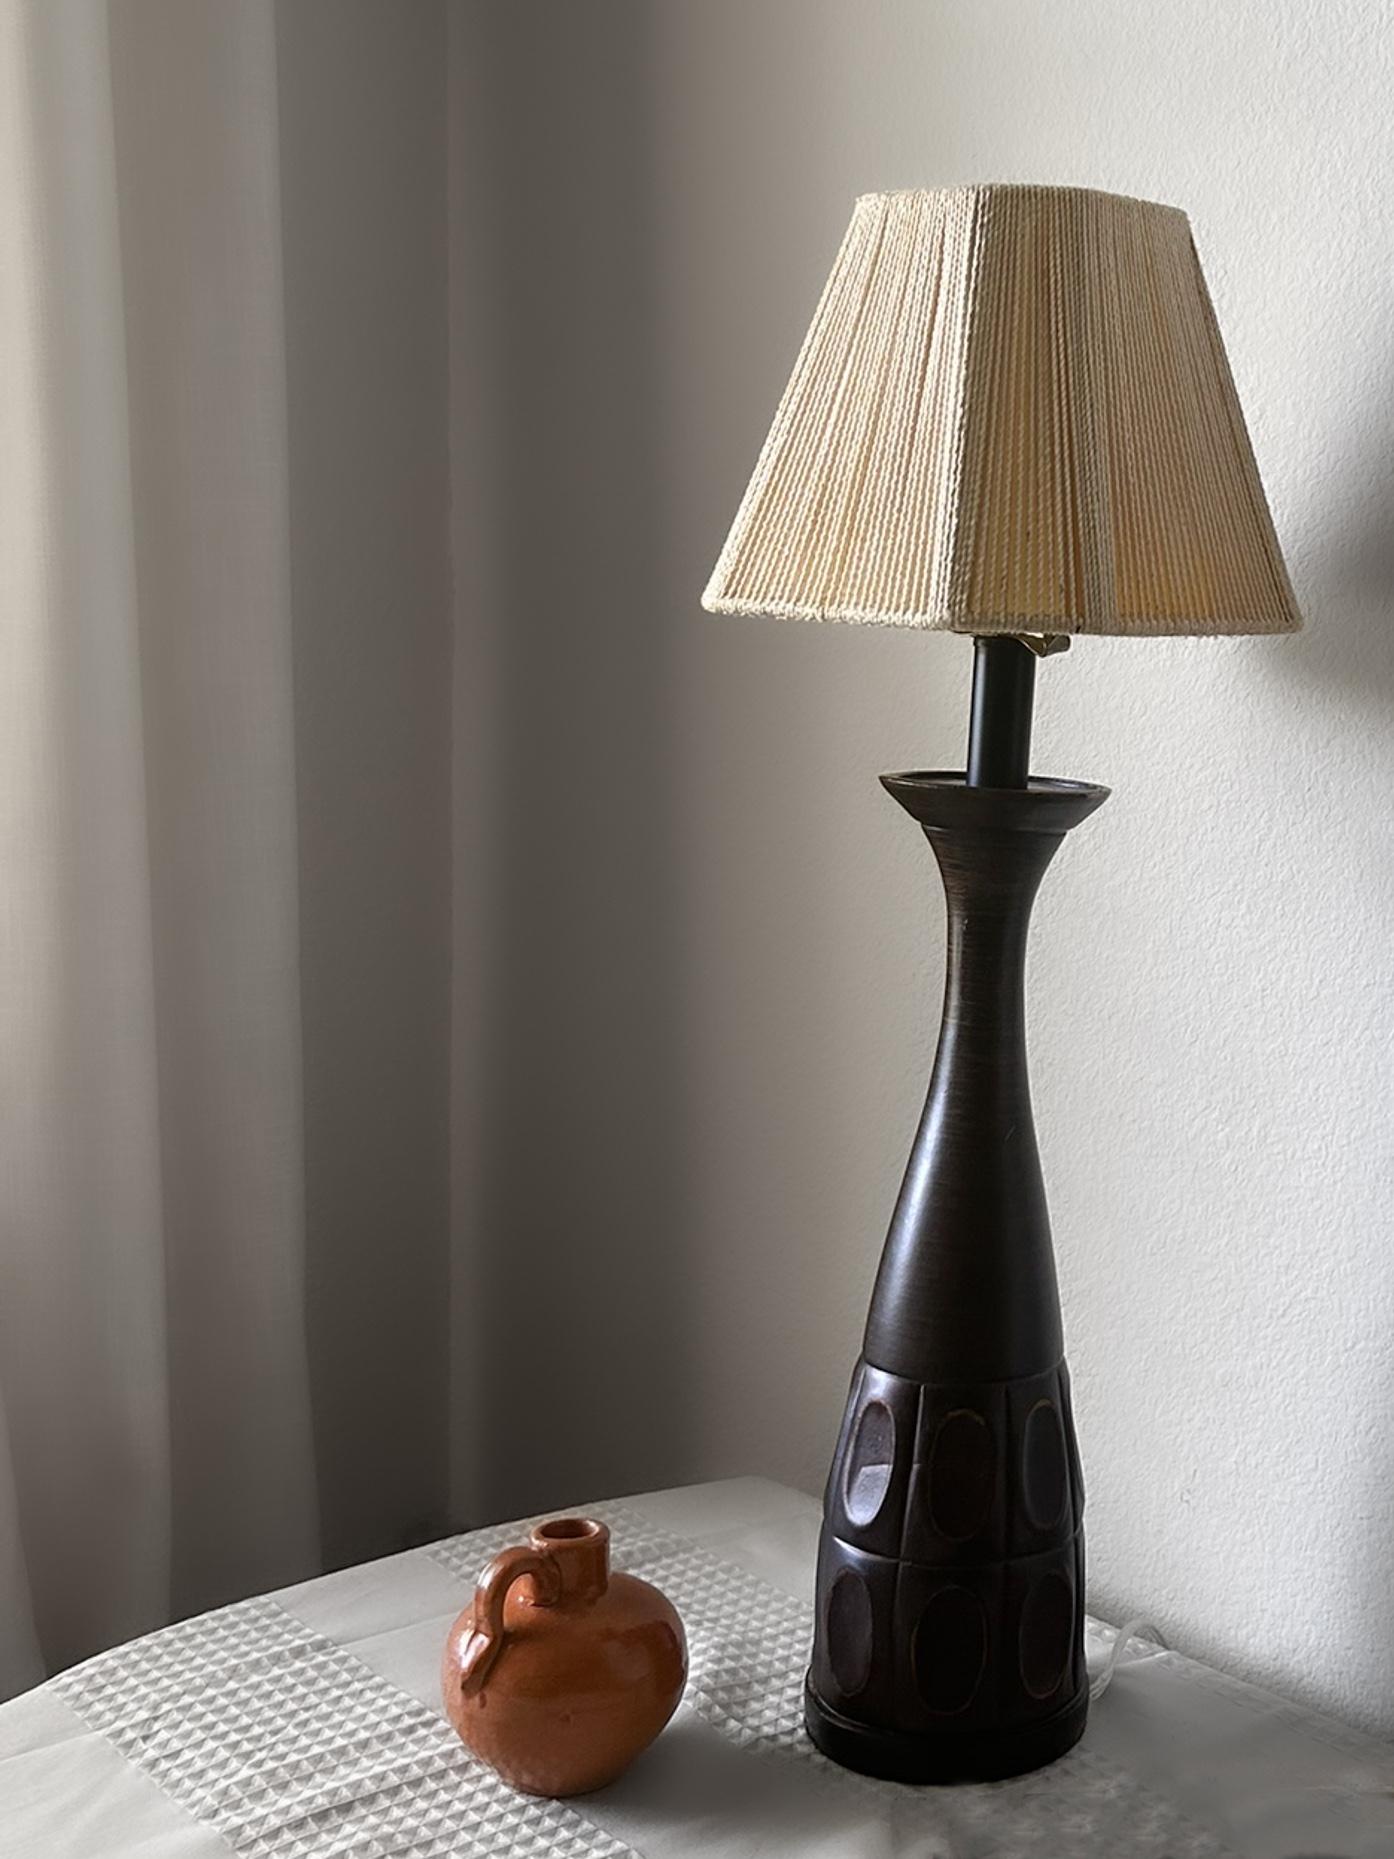 Brutalist table lamp. Dimensions: Height 20.5